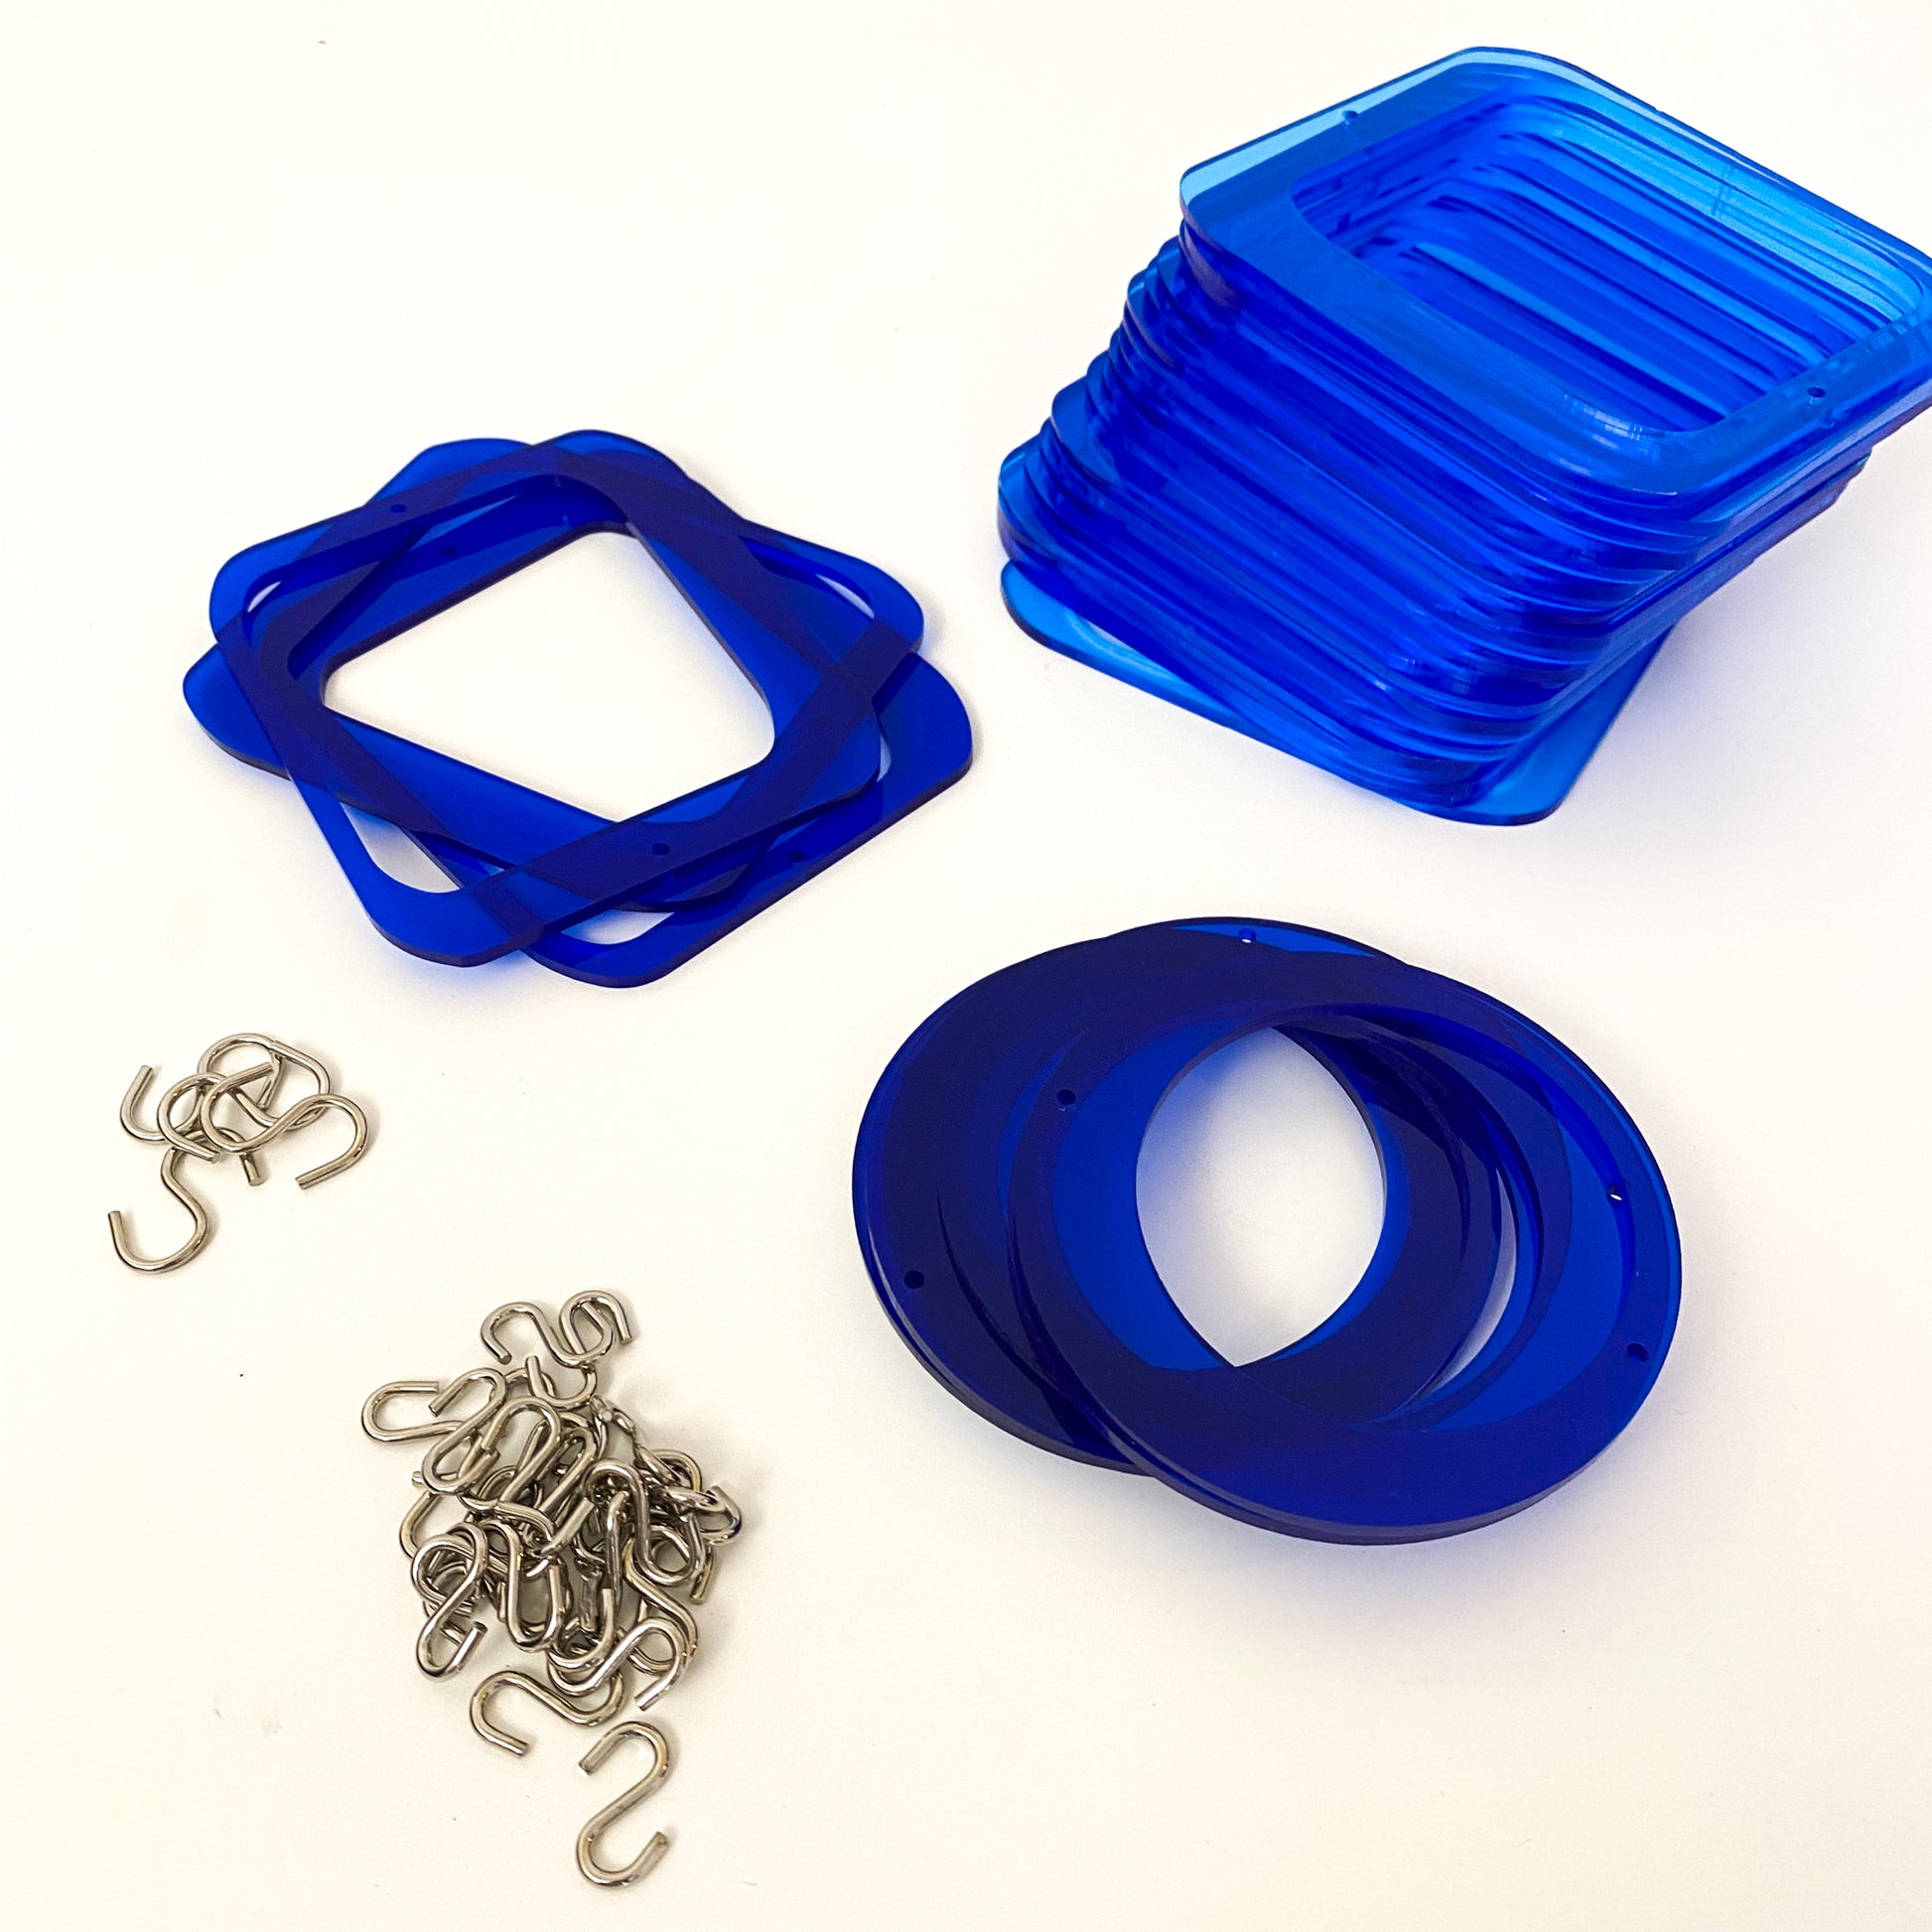 Parts for cool retro kinetic art piece DIY Kit in blue and navy blue for wall art, mobiles, or room dividers by AtomicMobiles.com